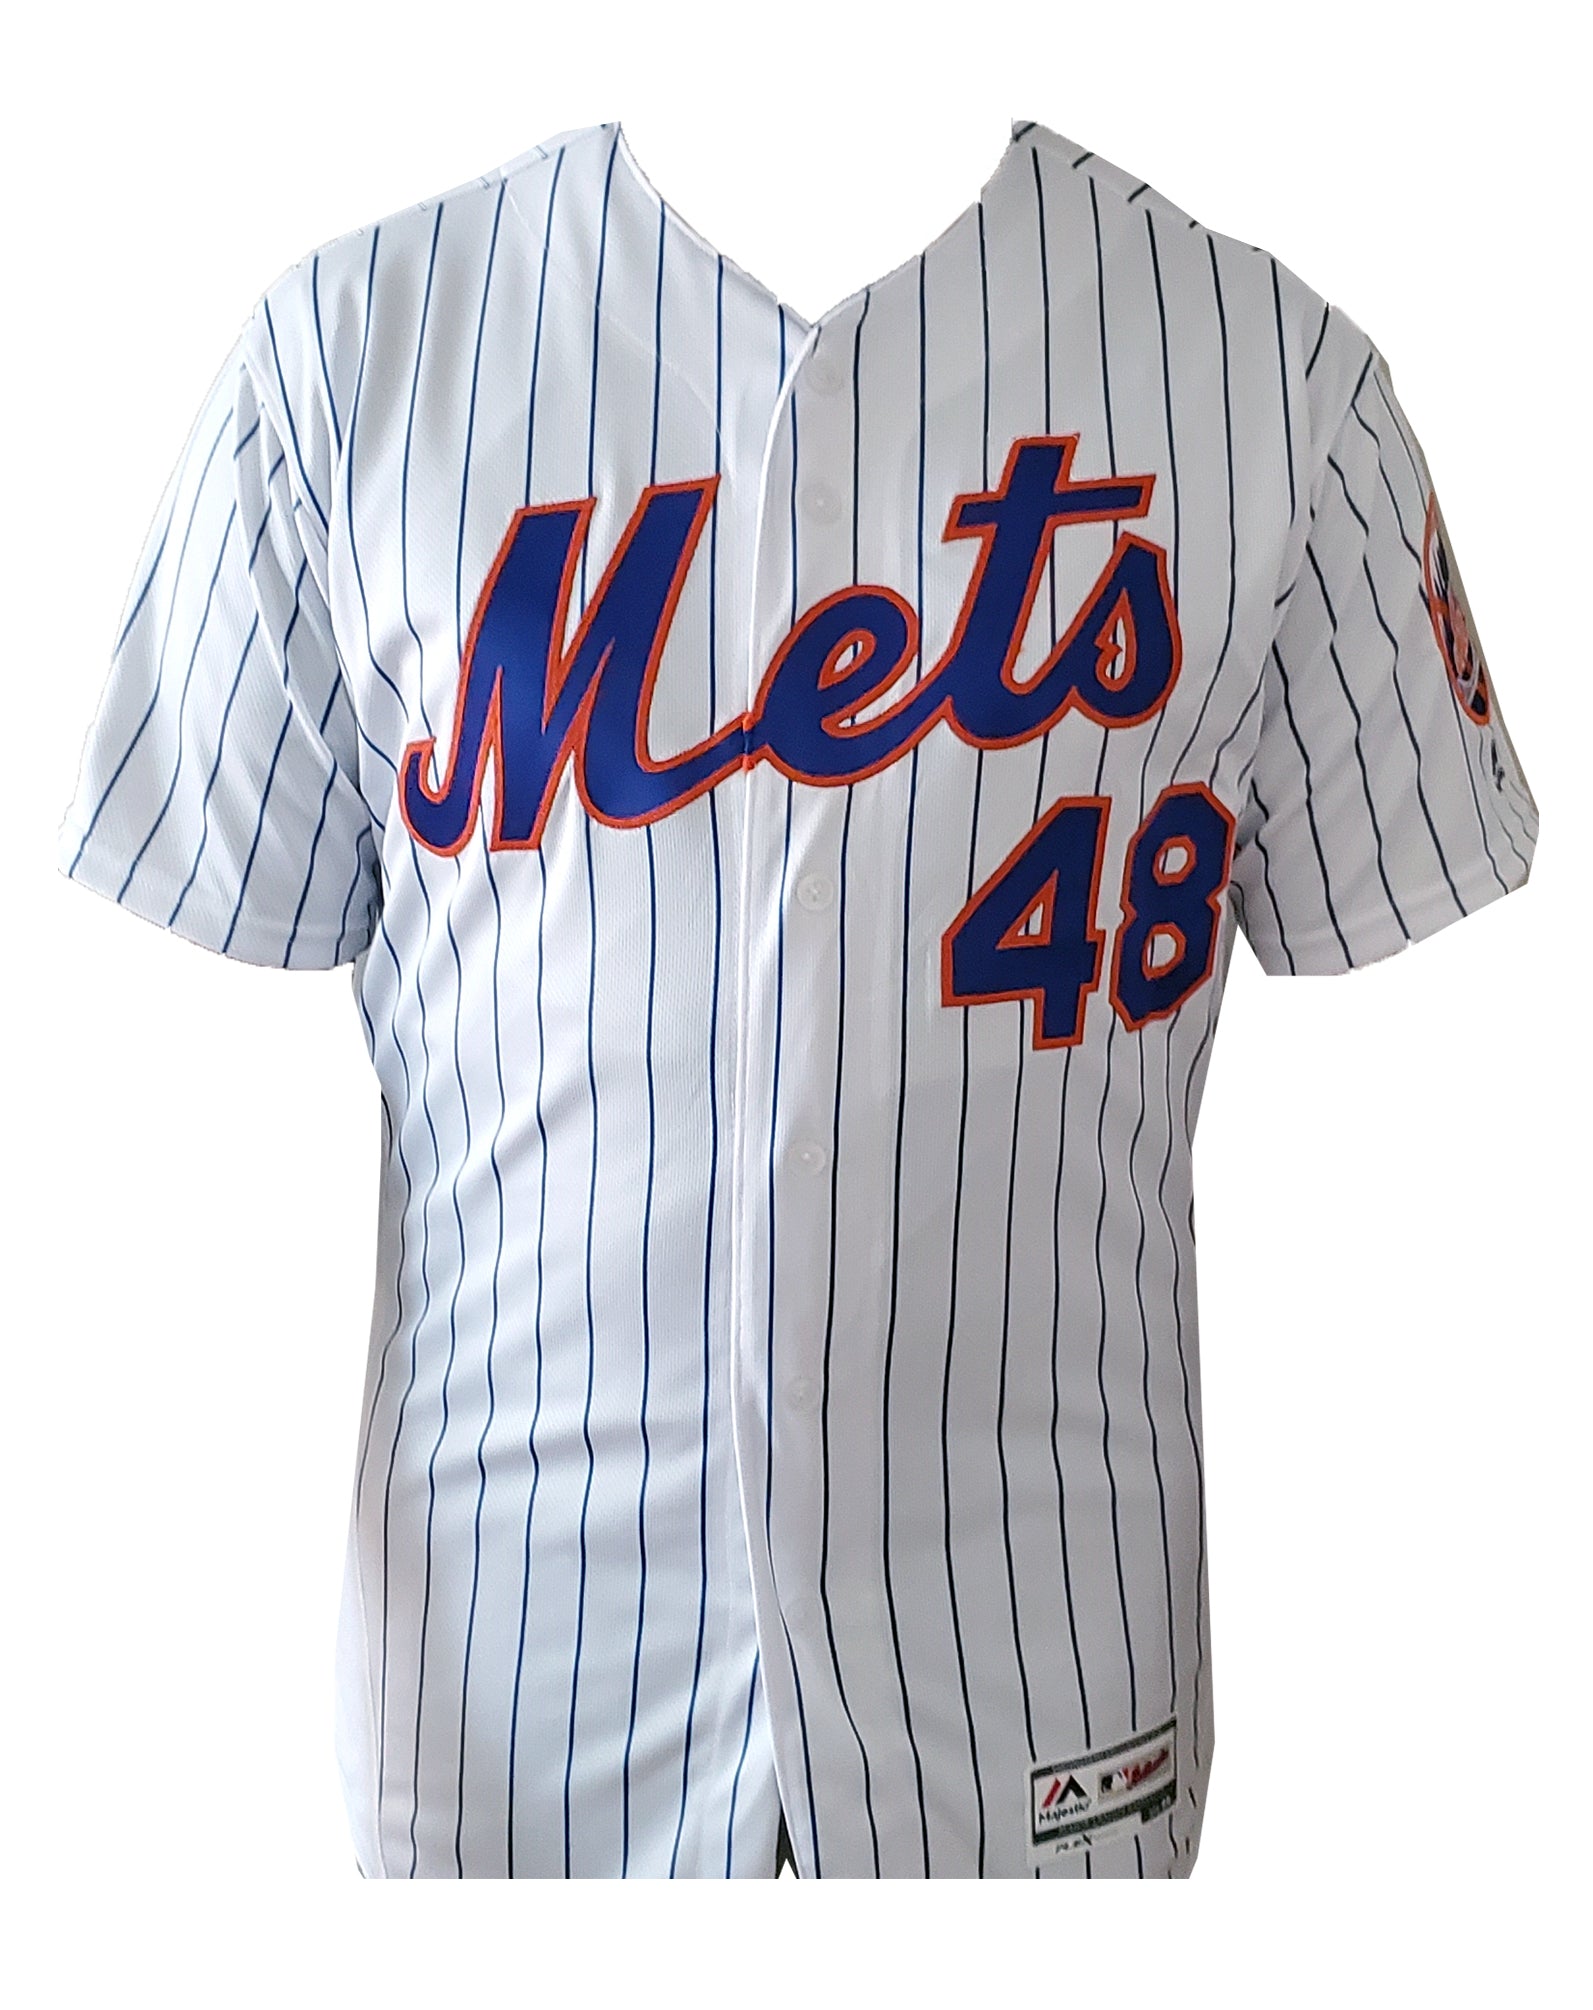 authentic degrom jersey